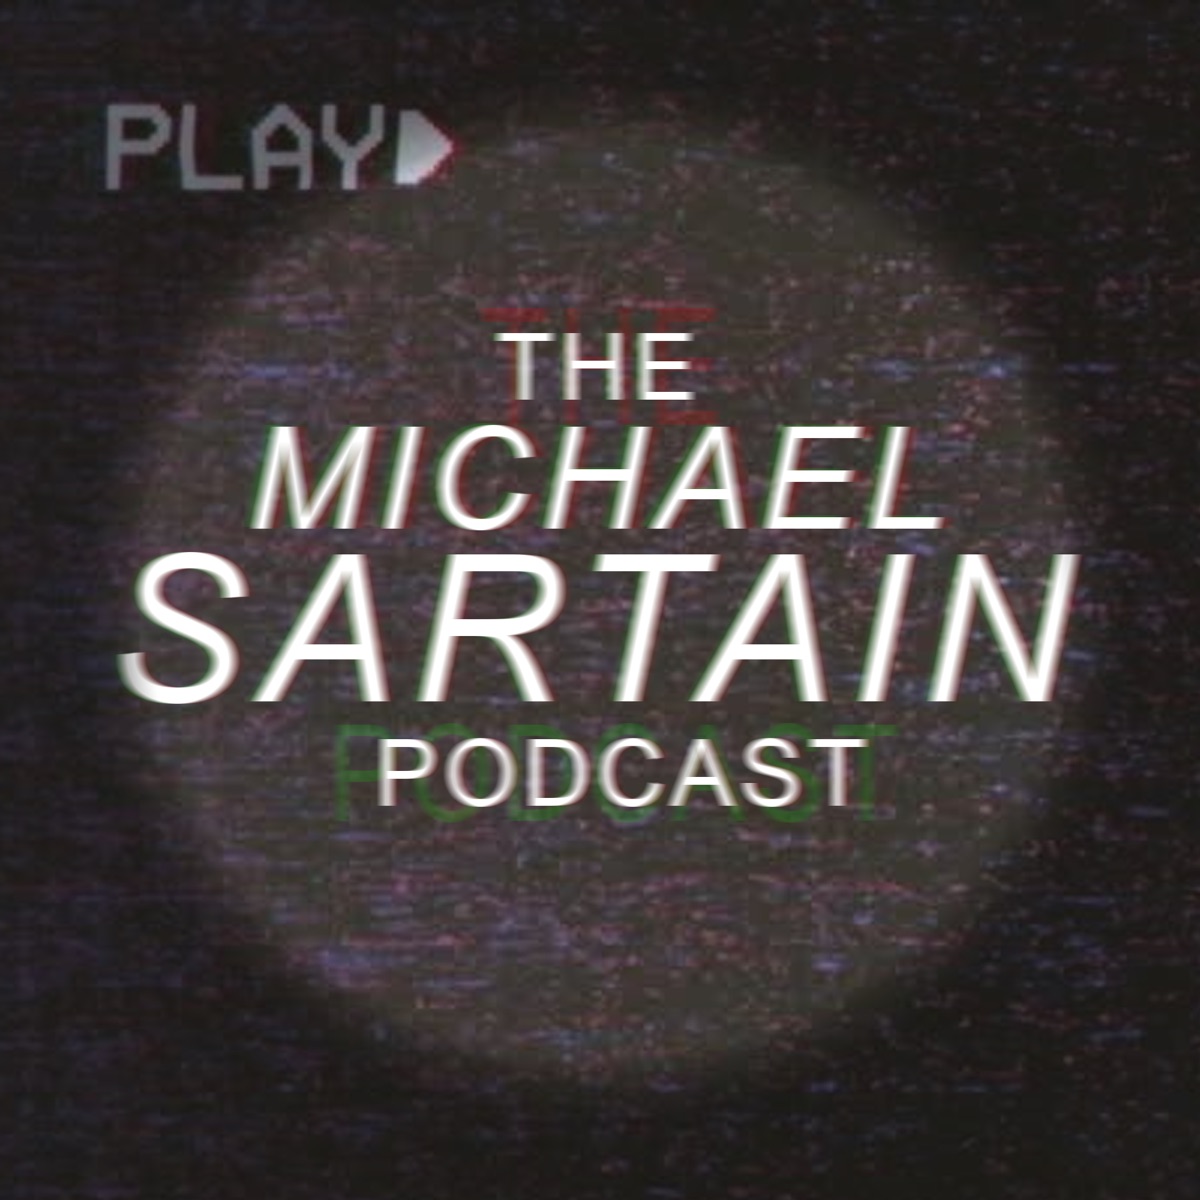 The Michael Sartain Podcast – Podcast image